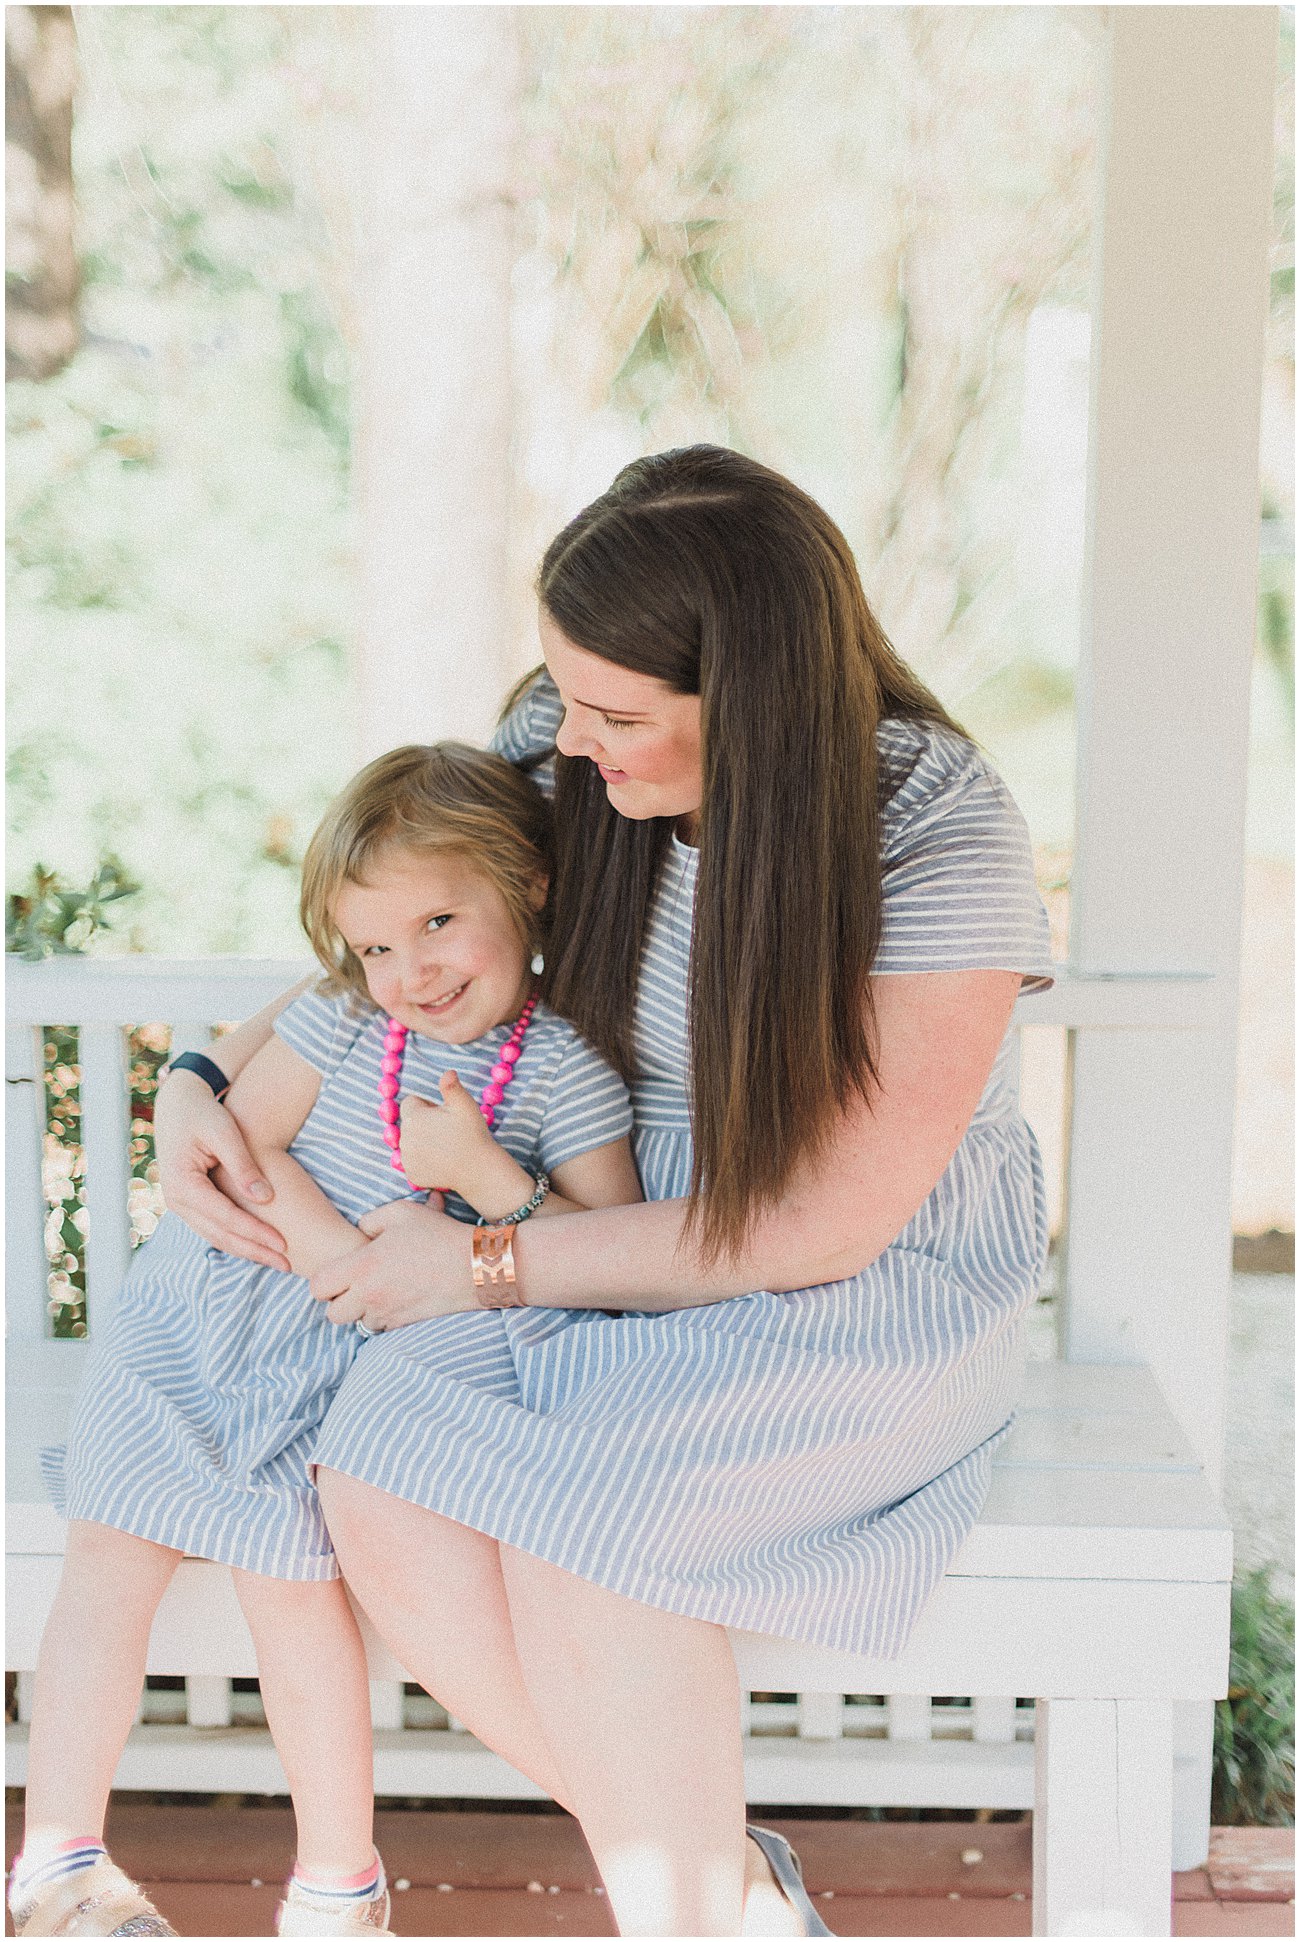 Ethical Mommy & Me Fashion: Elegantees Riley Striped Dress styled by popular North Carolina ethical fashion blogger Still Being Molly